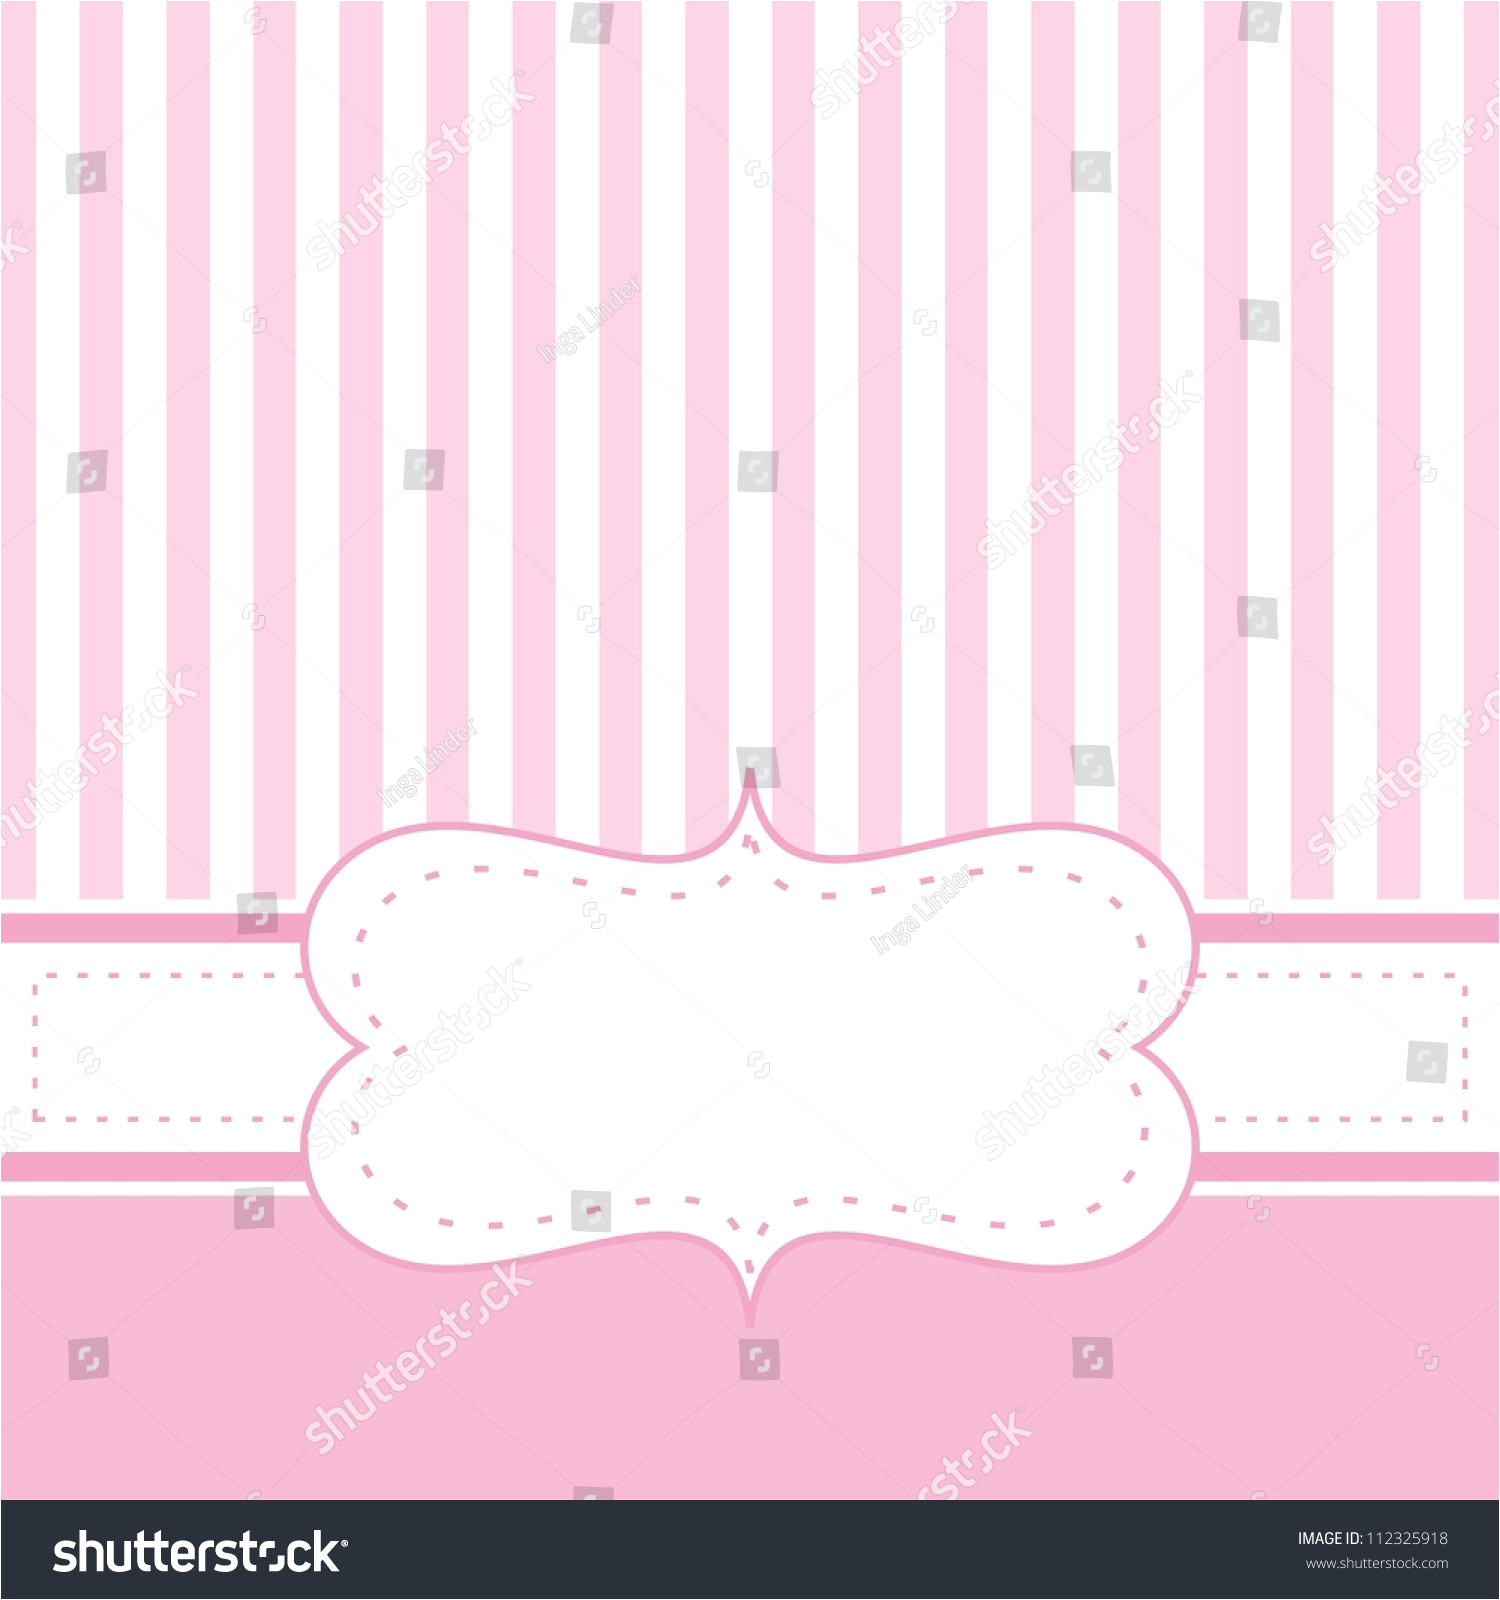 stock vector pink vector card invitation for baby shower wedding or birthday party with white stripes cute